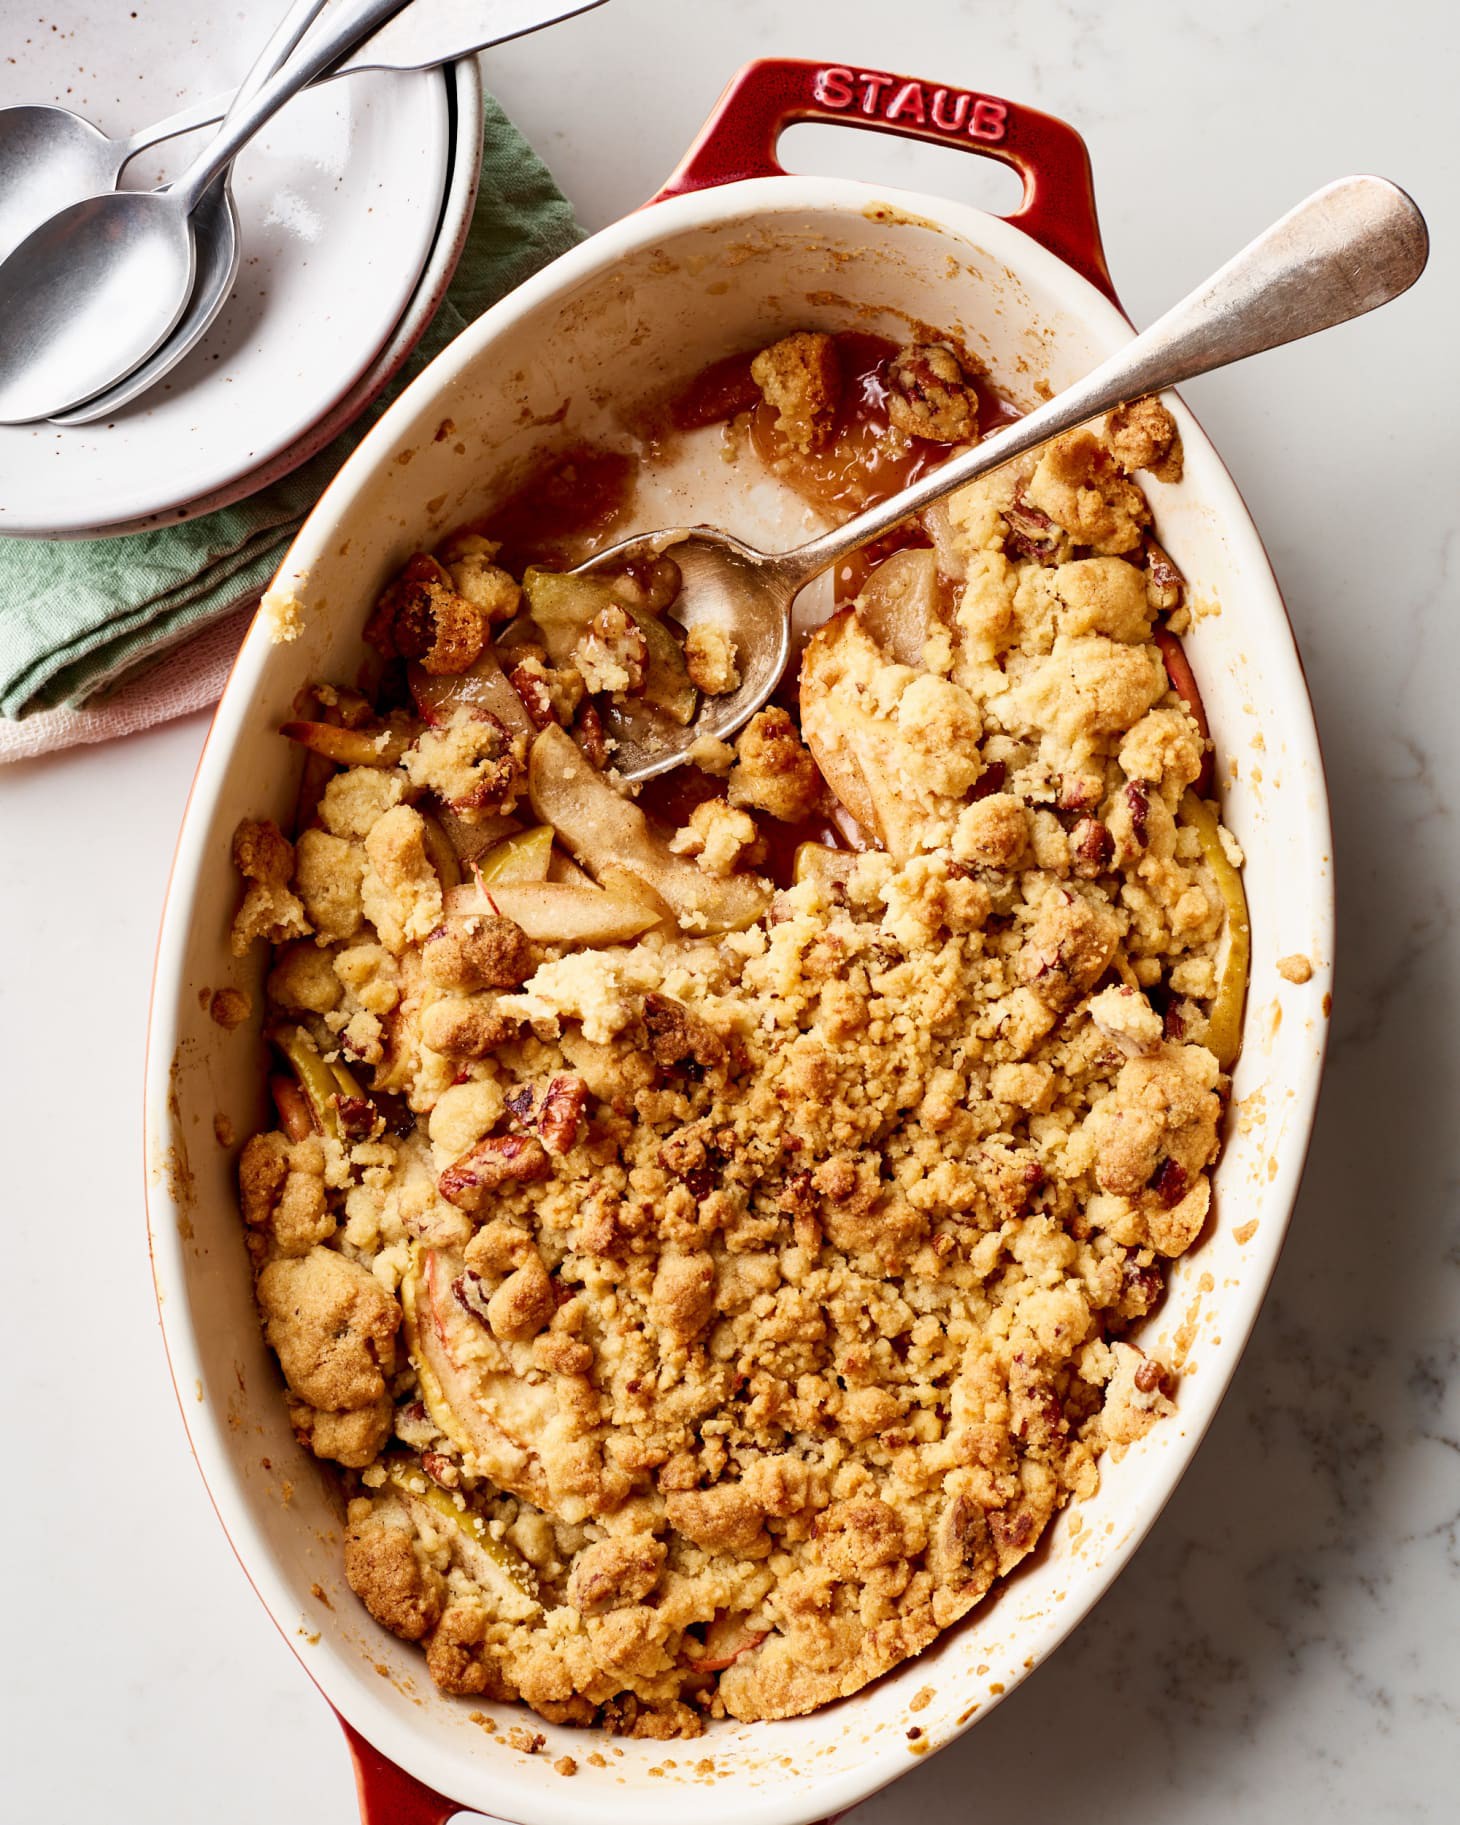 k_Photo_Recipes_2019-10-how-to-easiest-apple-crumble_HT-Easiest-Apple-Crumble_078.jpeg